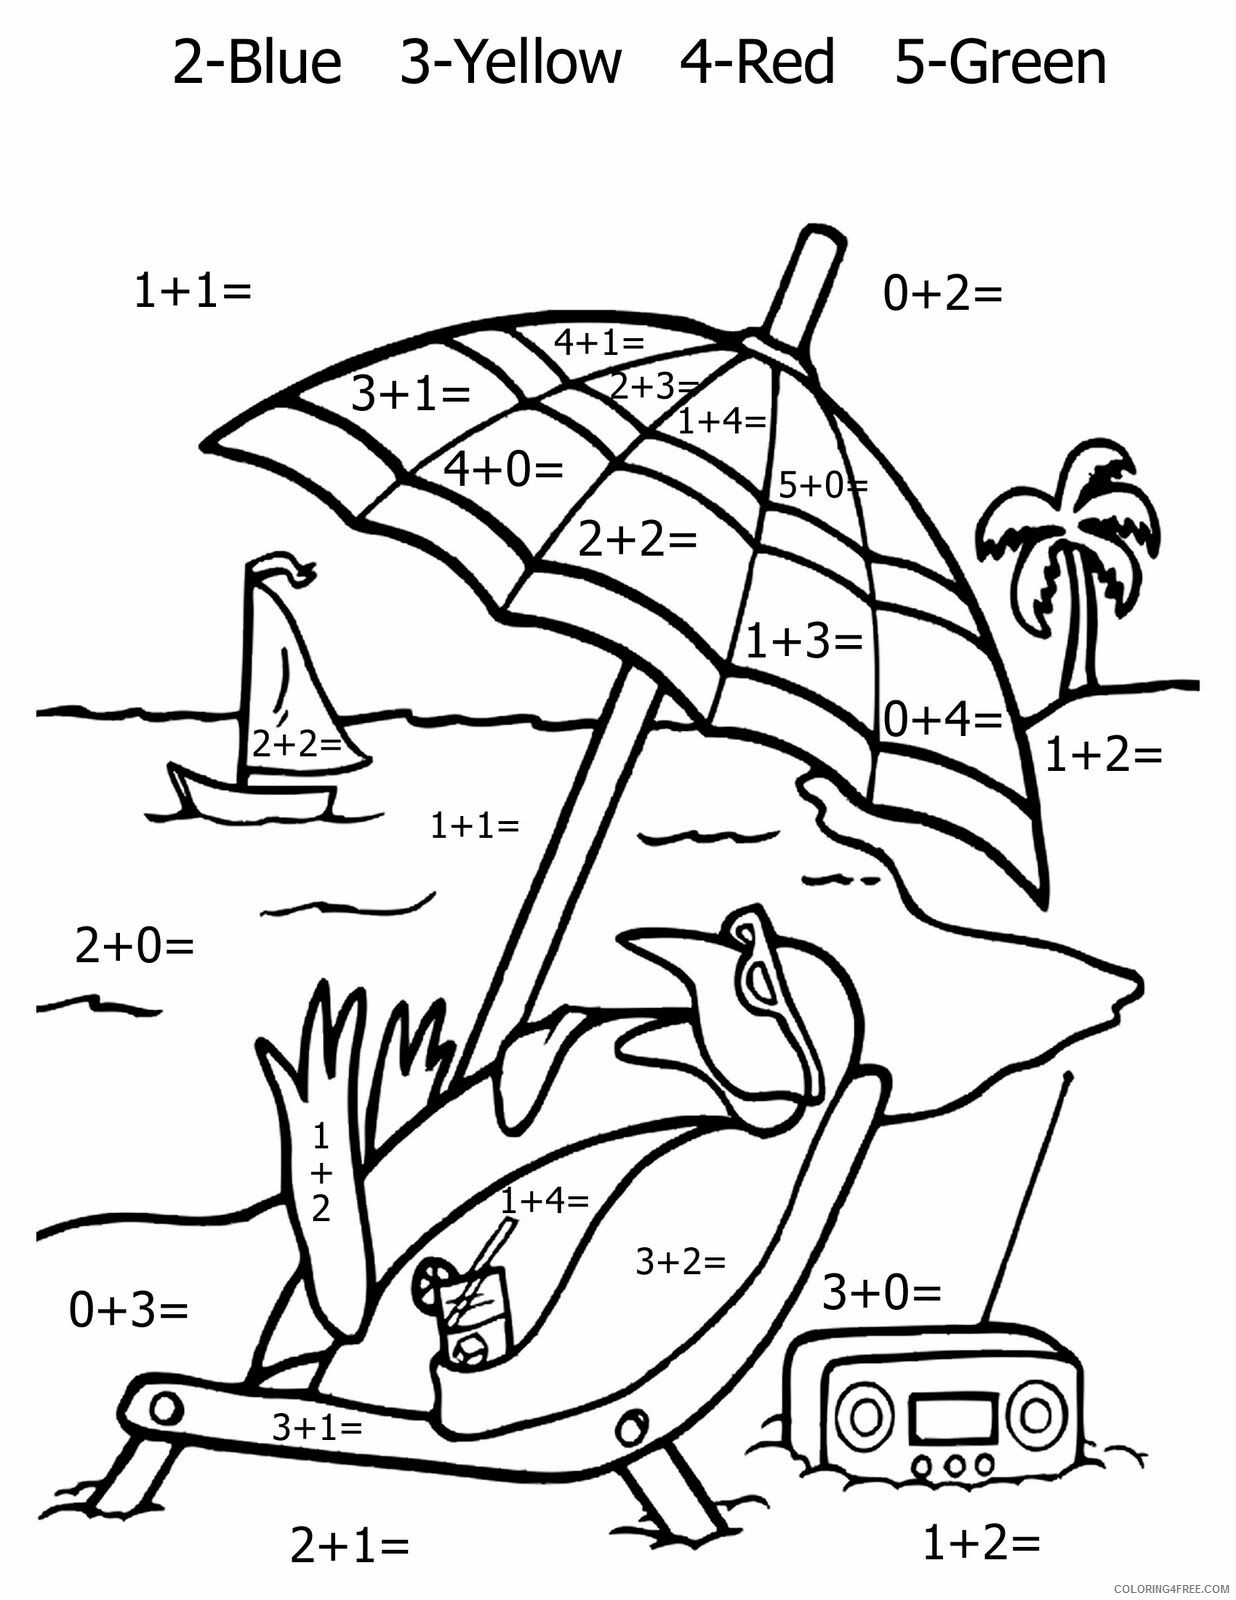 Addition and Subtraction Coloring Pages Printable Sheets Homeschool Math jpg 2021 a Coloring4free